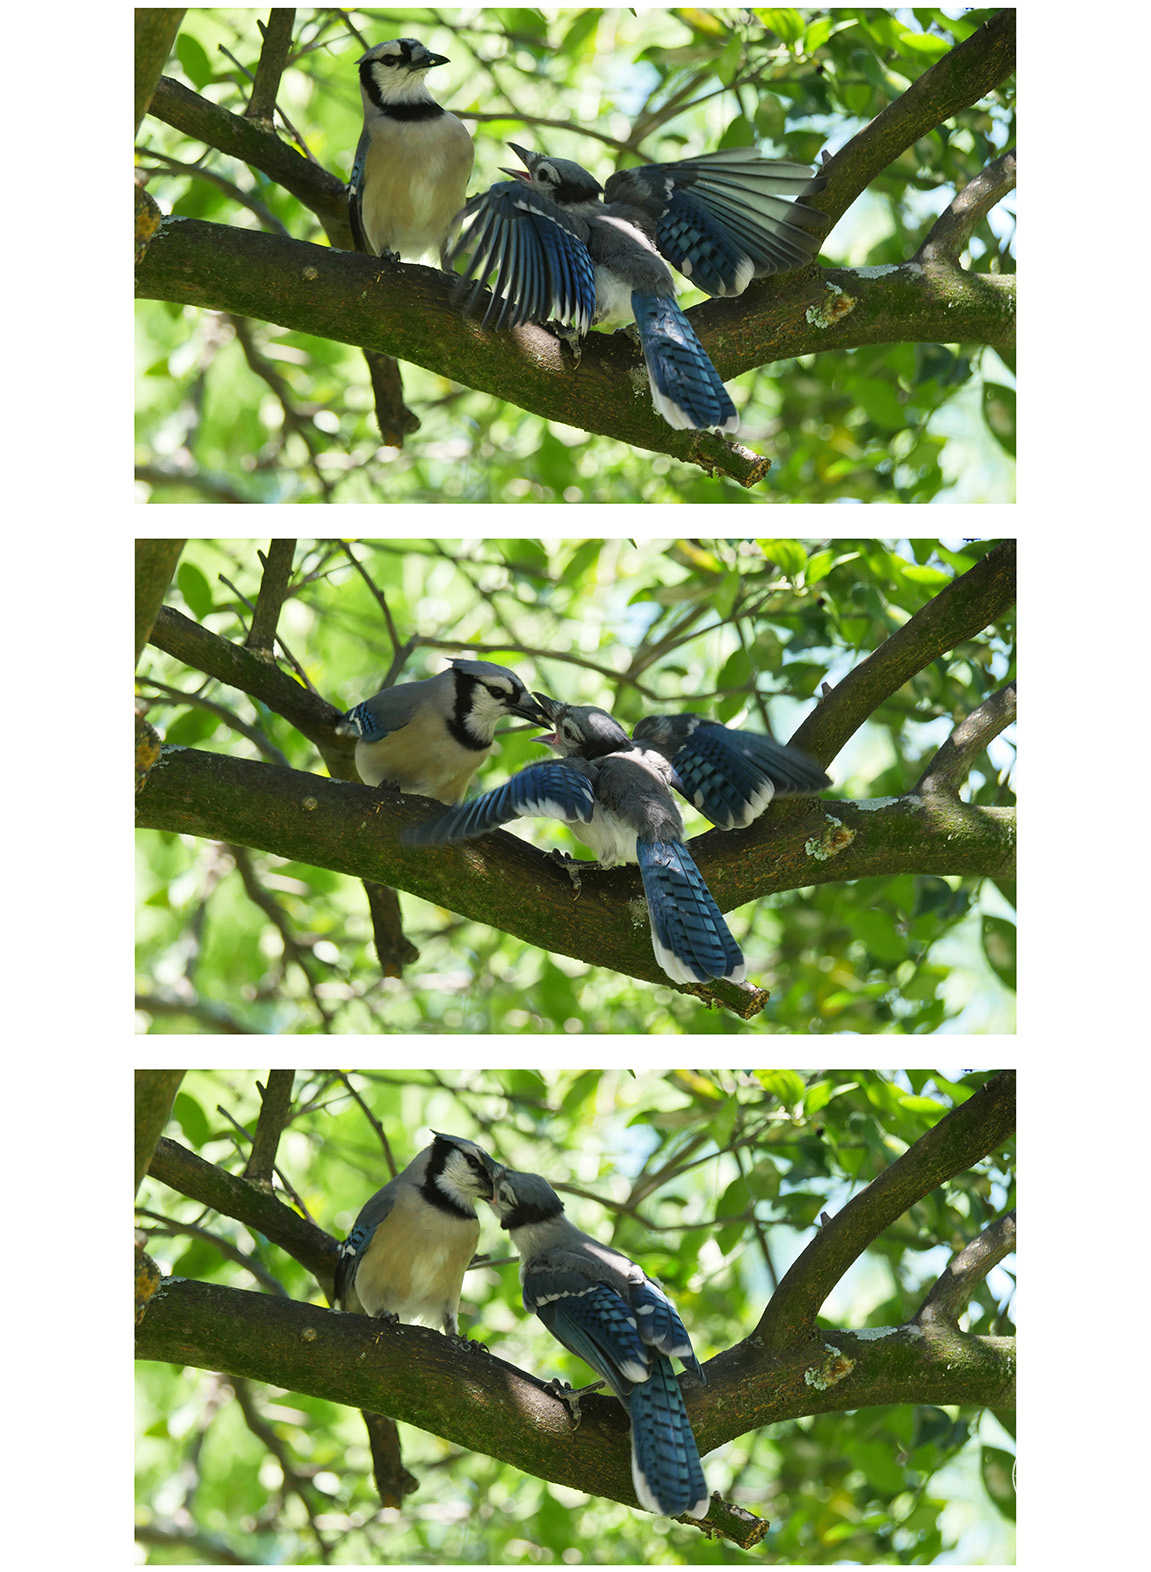 Blue Jay feeding its young